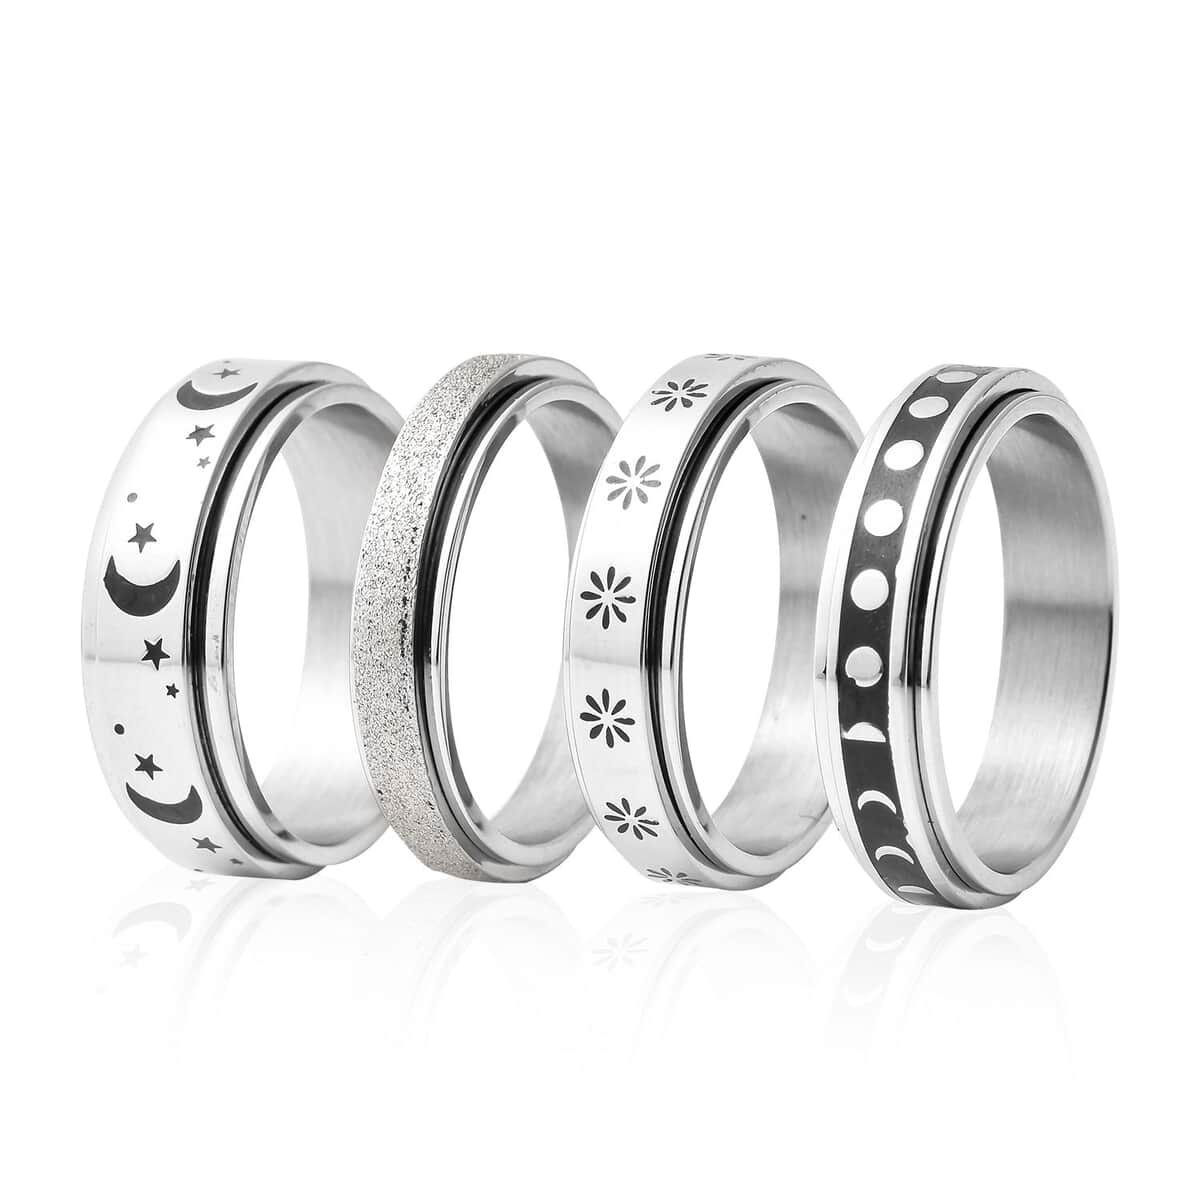 Set of 4 Stress Buster Spinner Ring in Stainless Steel (Size 13.0) image number 2